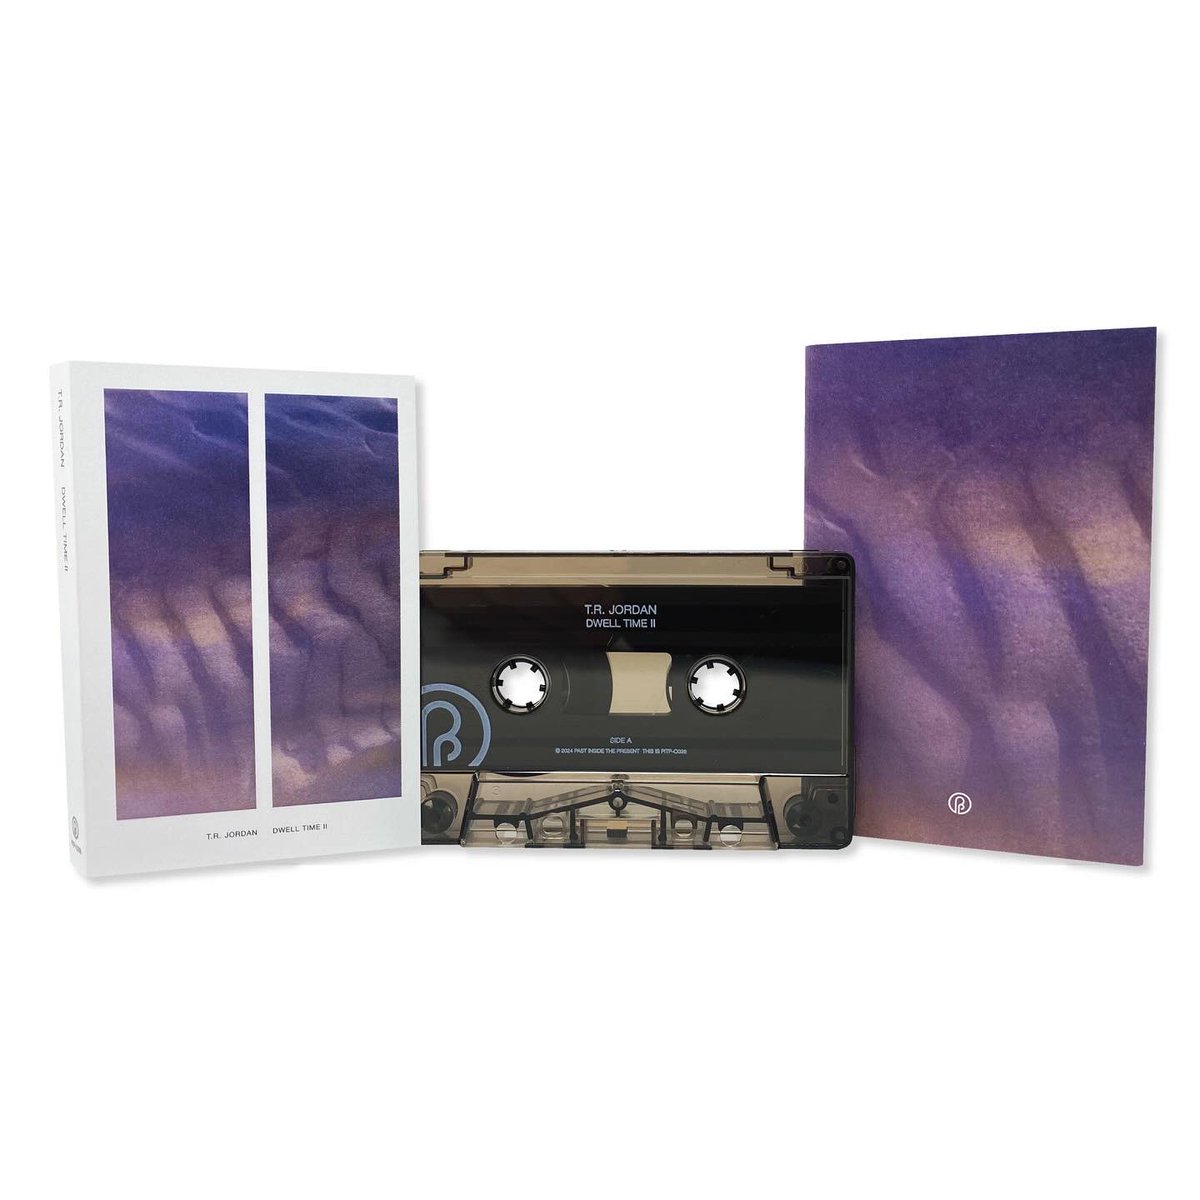 T.R. Jordan ‘Dwell Time II’ Deluxe Cassette + Digital Numbered Digipak + Digital Pre-order now at: 🇺🇸 pitp.bandcamp.com 🇺🇸 pitp.us 🇬🇧 juno.co.uk Listening Party: March 20th - 1:00pm ET RSVP at: pitp.bandcamp.com